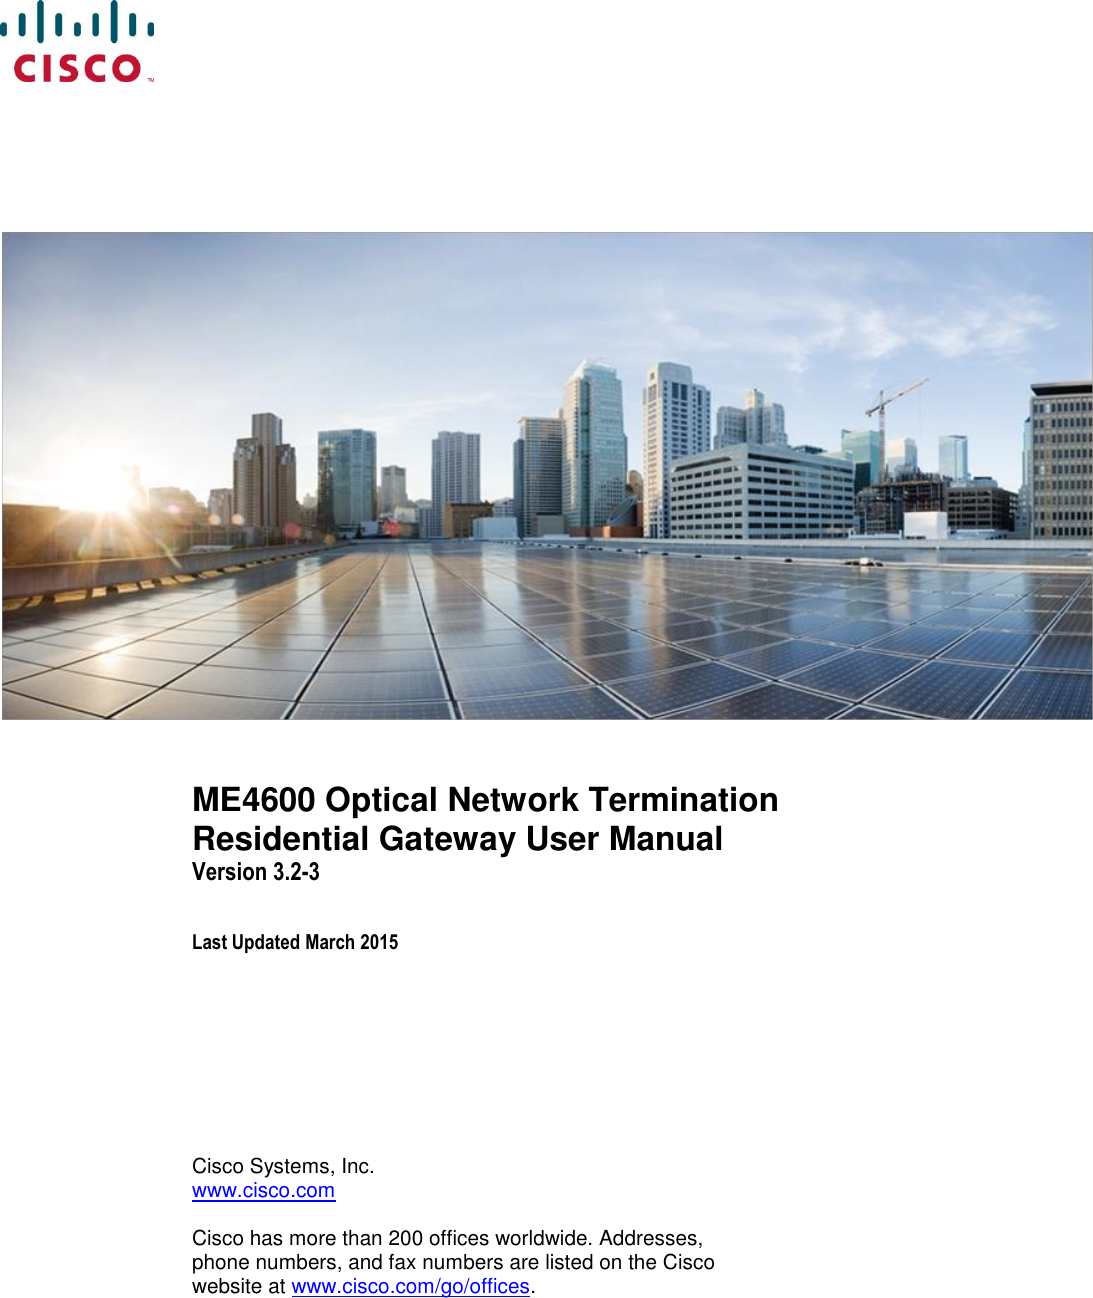     ME4600 Optical Network Termination Residential Gateway User Manual Version 3.2-3 Last Updated March 2015 Cisco Systems, Inc. www.cisco.com  Cisco has more than 200 offices worldwide. Addresses, phone numbers, and fax numbers are listed on the Cisco website at www.cisco.com/go/offices.   